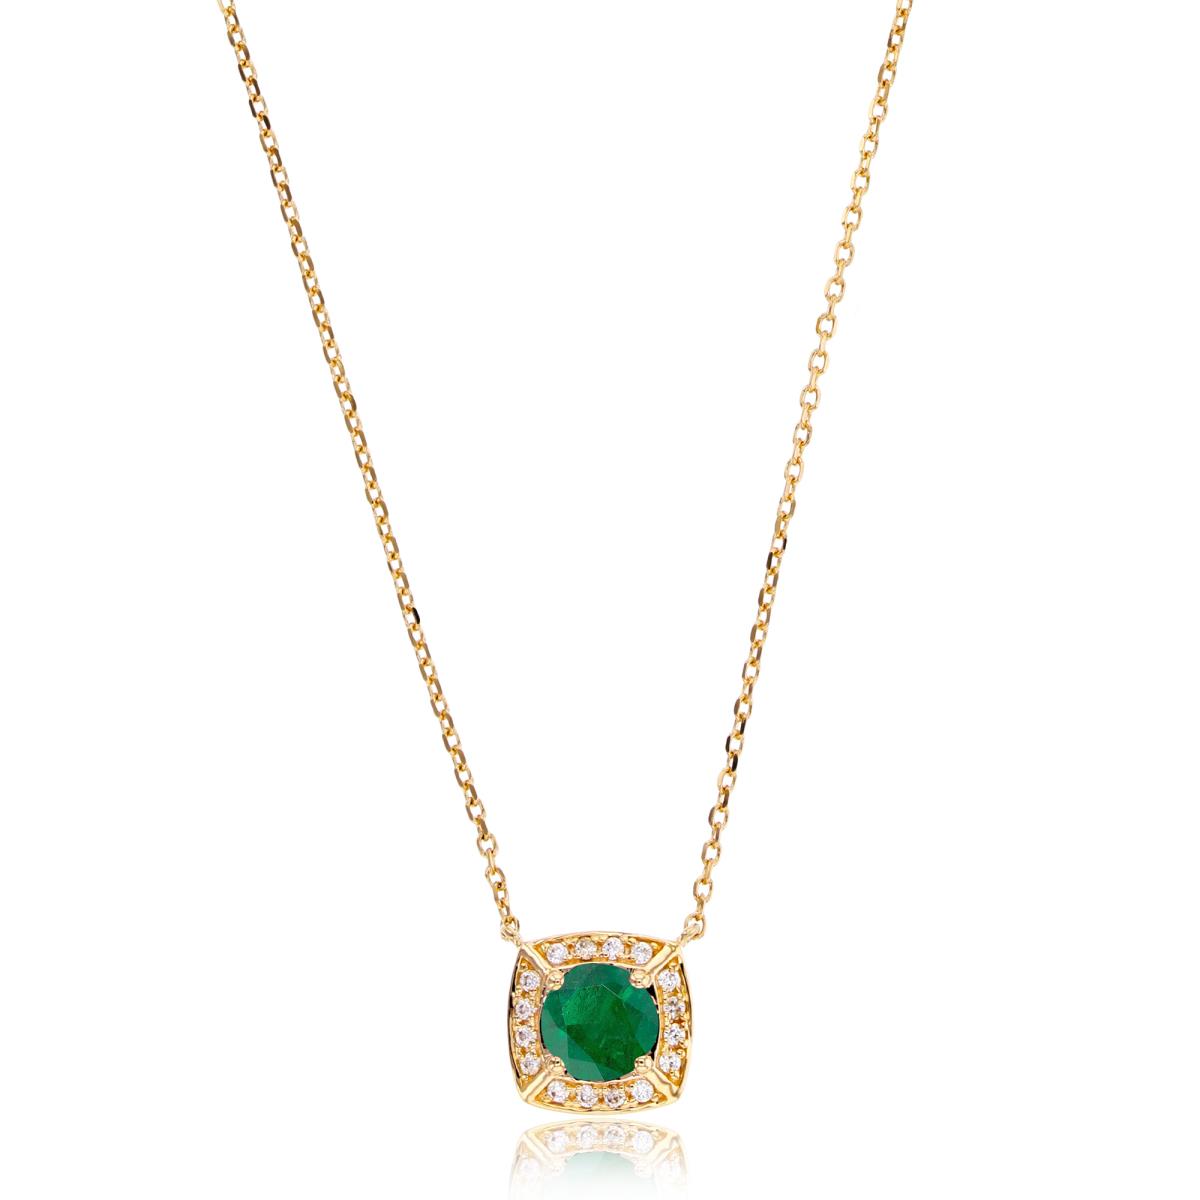 10K Yellow Gold 0.08 CTTW Rd Diamond & 5mm Rd Emerald Cushion 18" Necklace